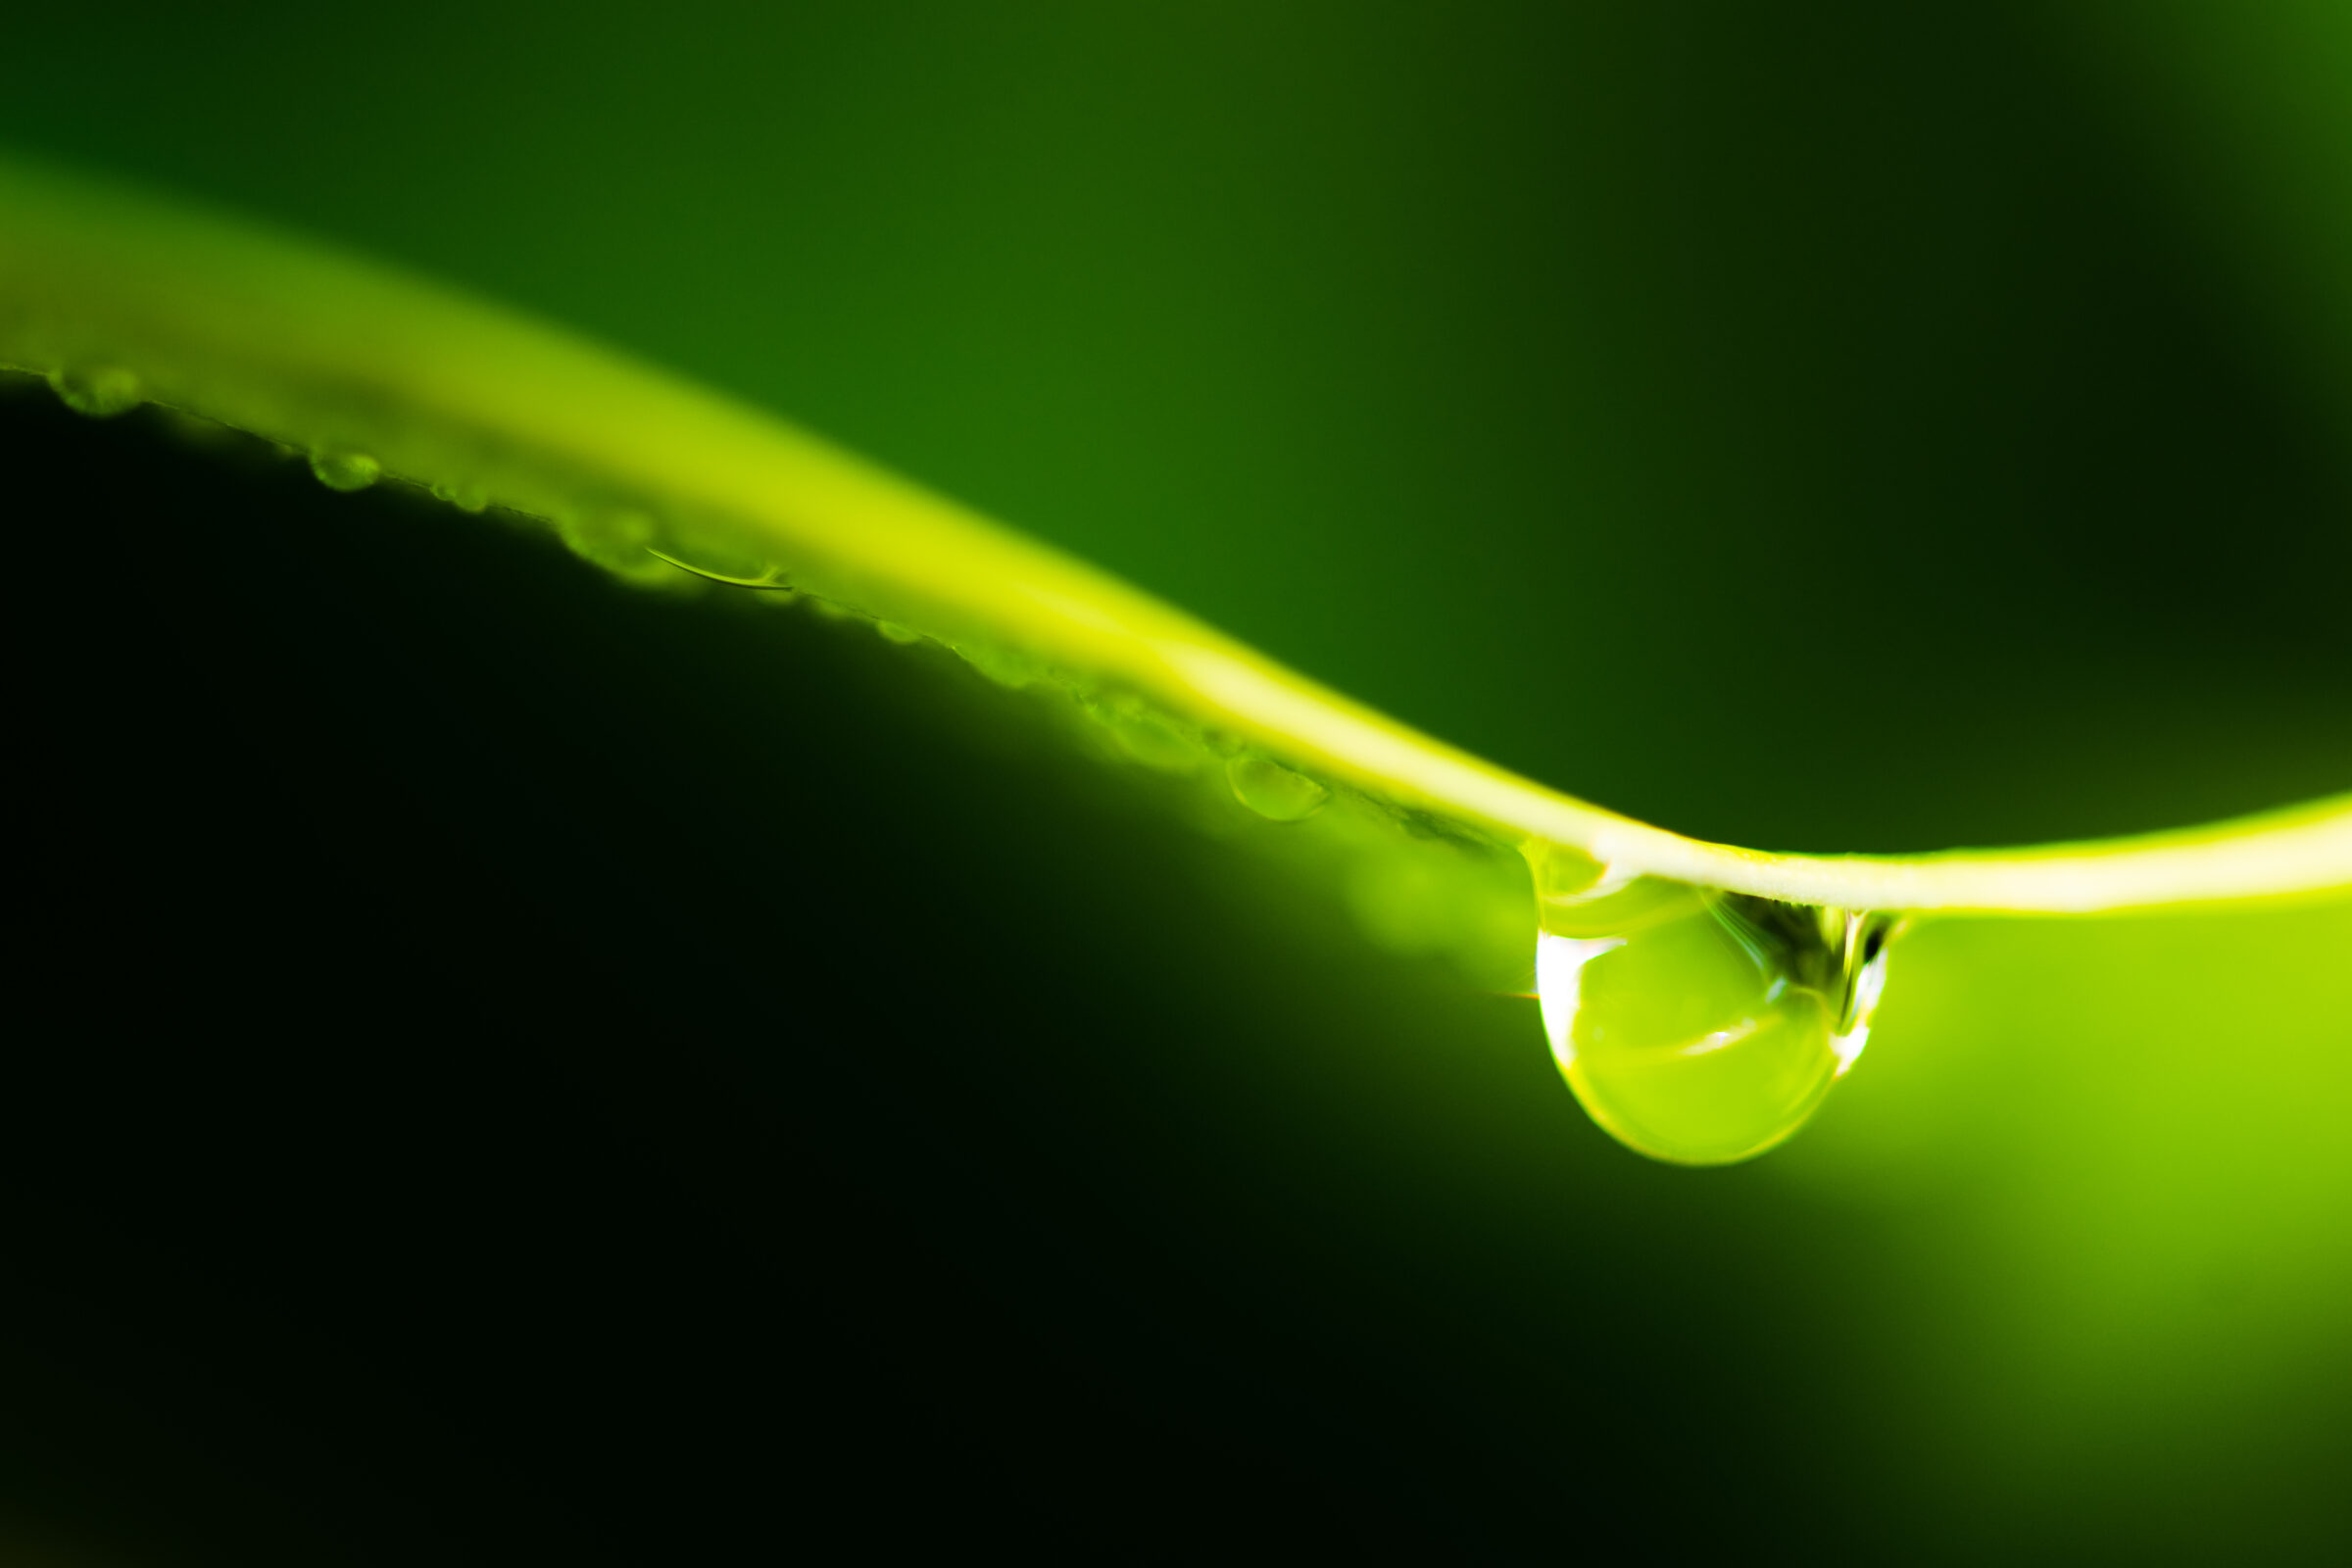 Raindrop or water droplet at green plant leaf with dark background. Copy space for text and content.